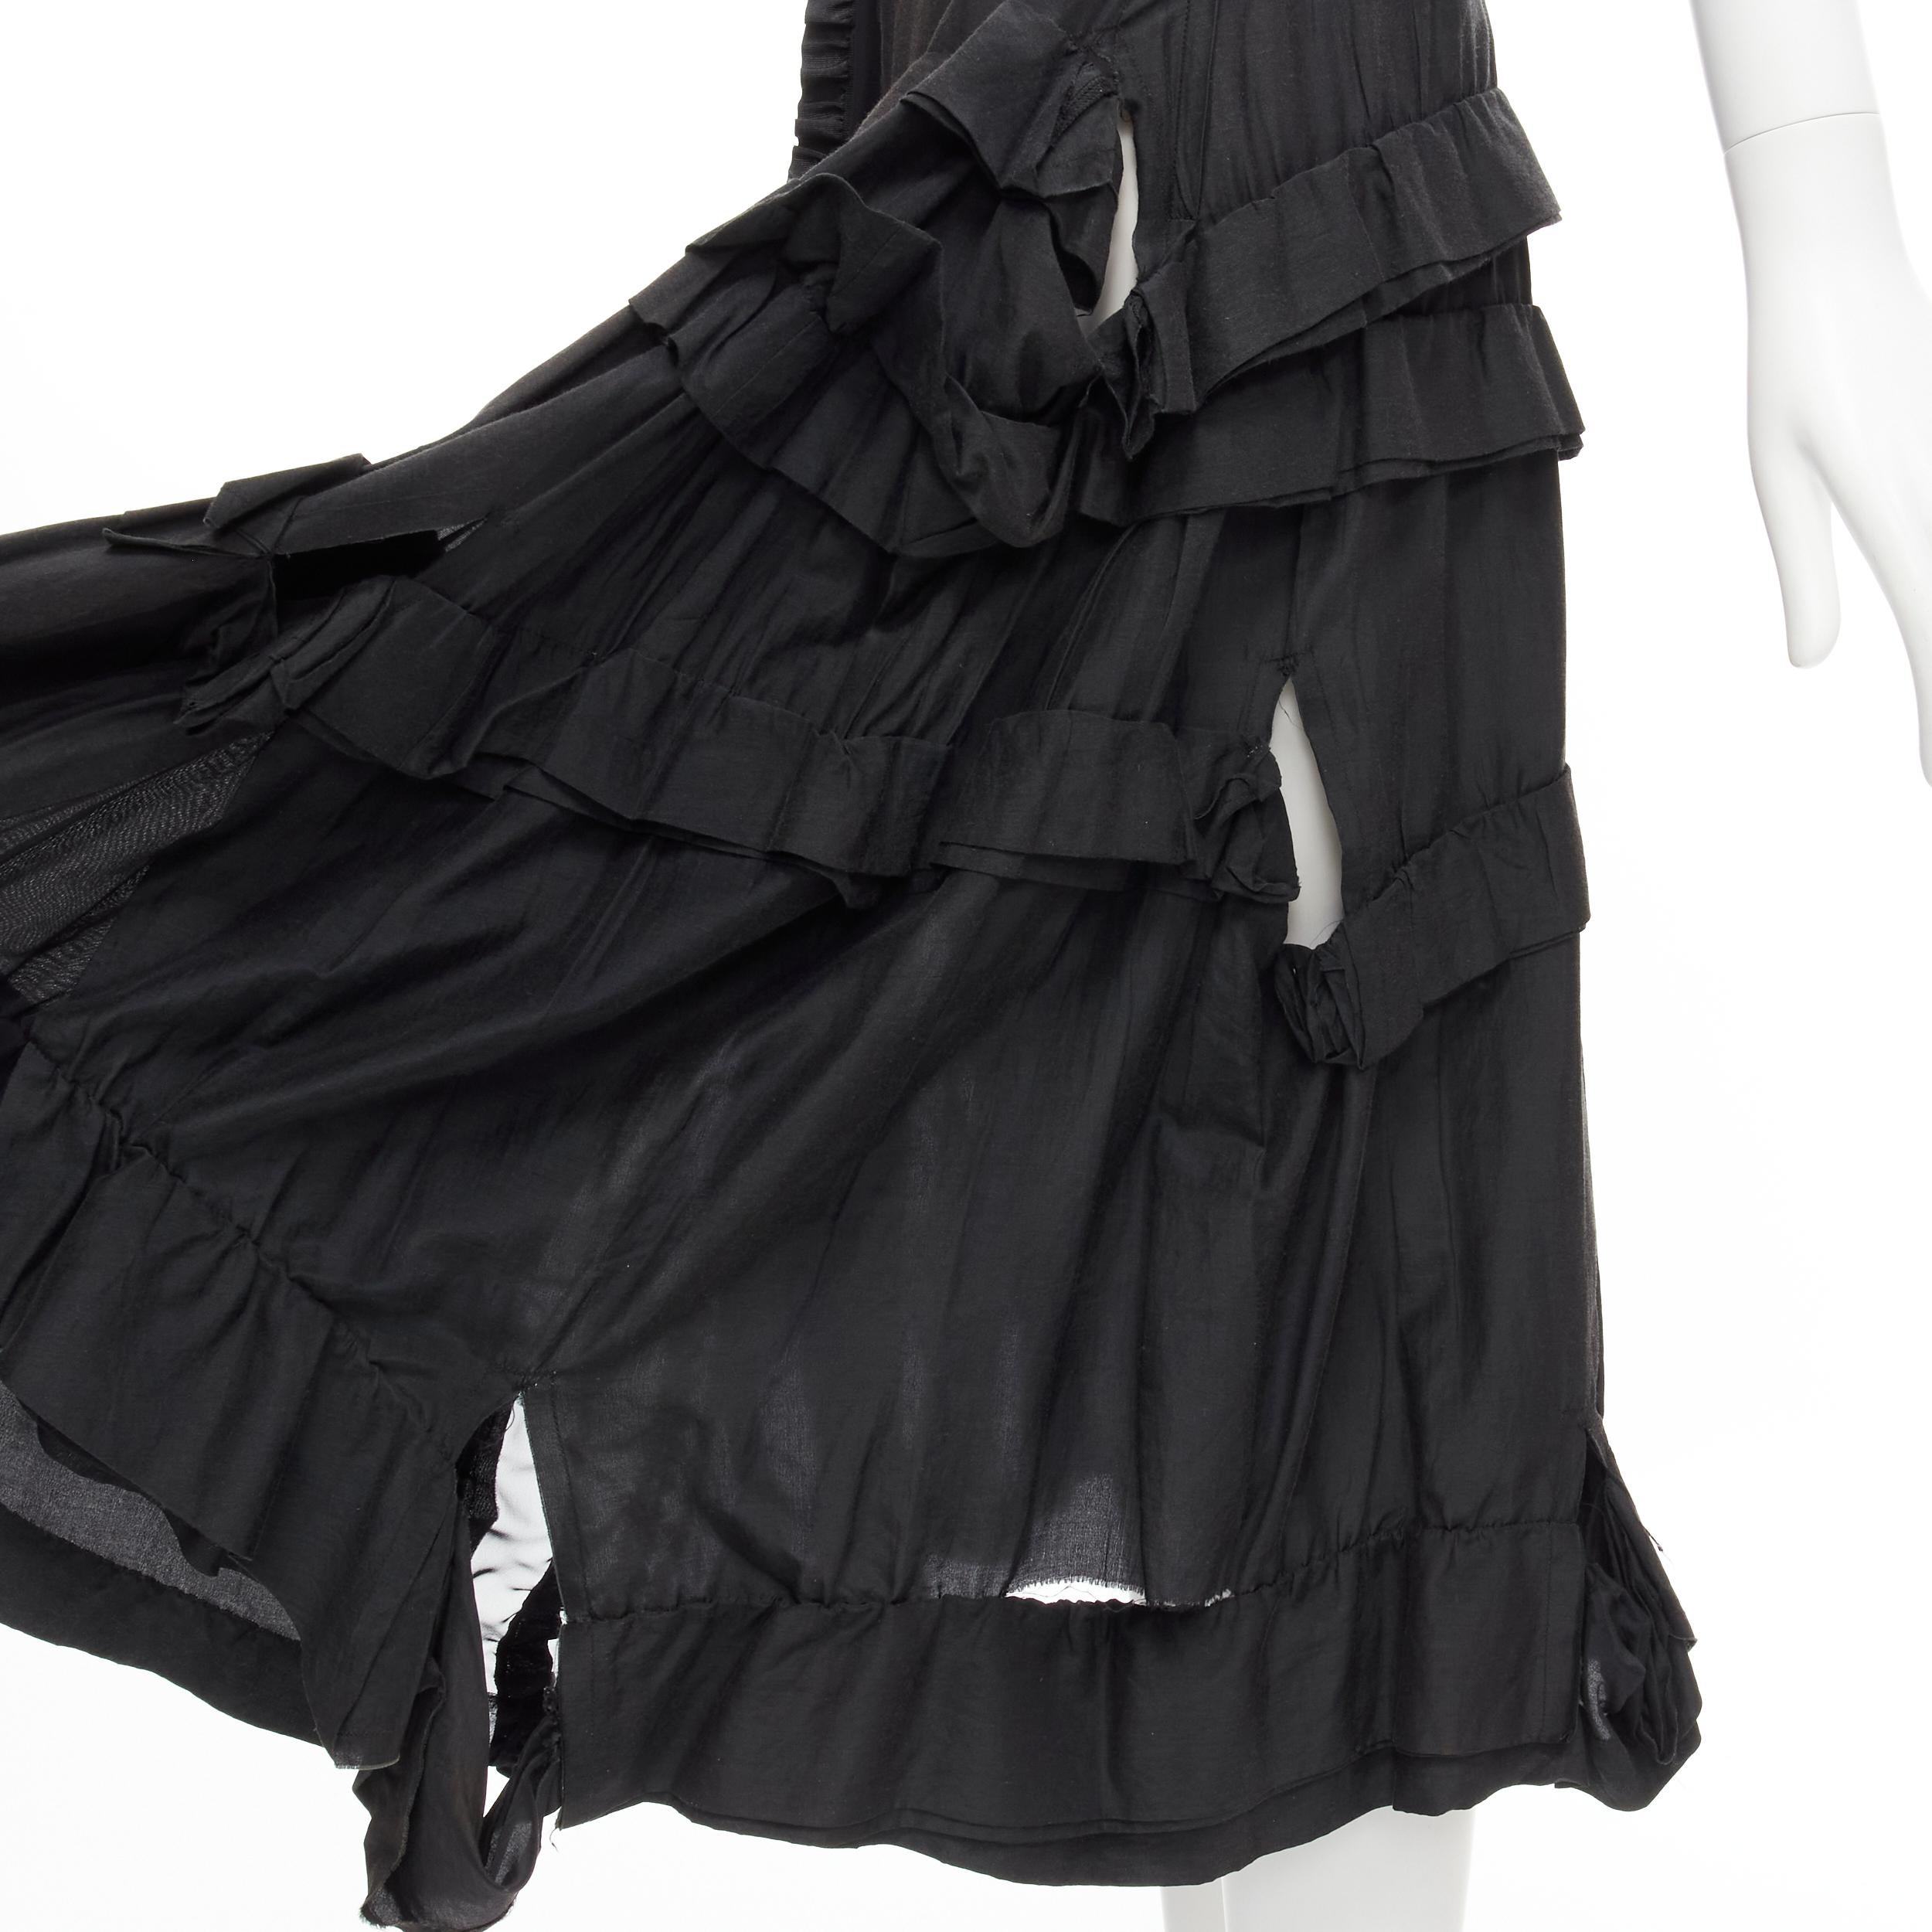 vintage COMME DES GARCONS 2005 Broken Bride black embroidery ruffle skirt M Reference: CRTI/A00352 
Brand: Comme Des Garcons 
Designer: Rei Kawakubo 
Collection: 2005 Runway 
Material: Silk 
Color: Black 
Pattern: Solid 
Closure: Zip 
Extra Detail: